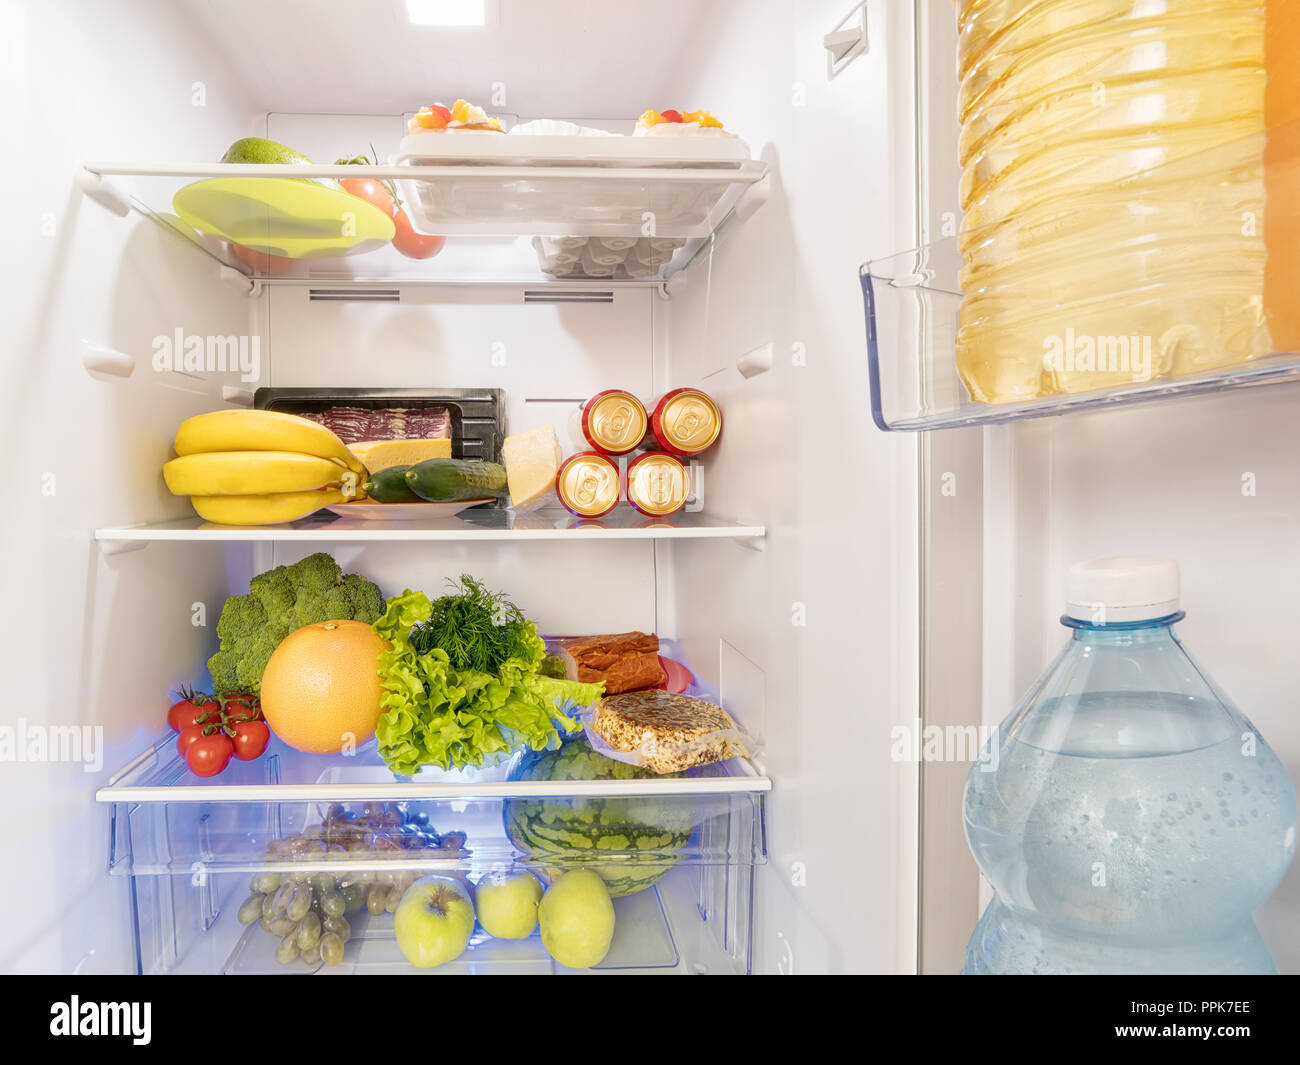 Fresh food and drink in the open and illuminated fridge. Stock Photo